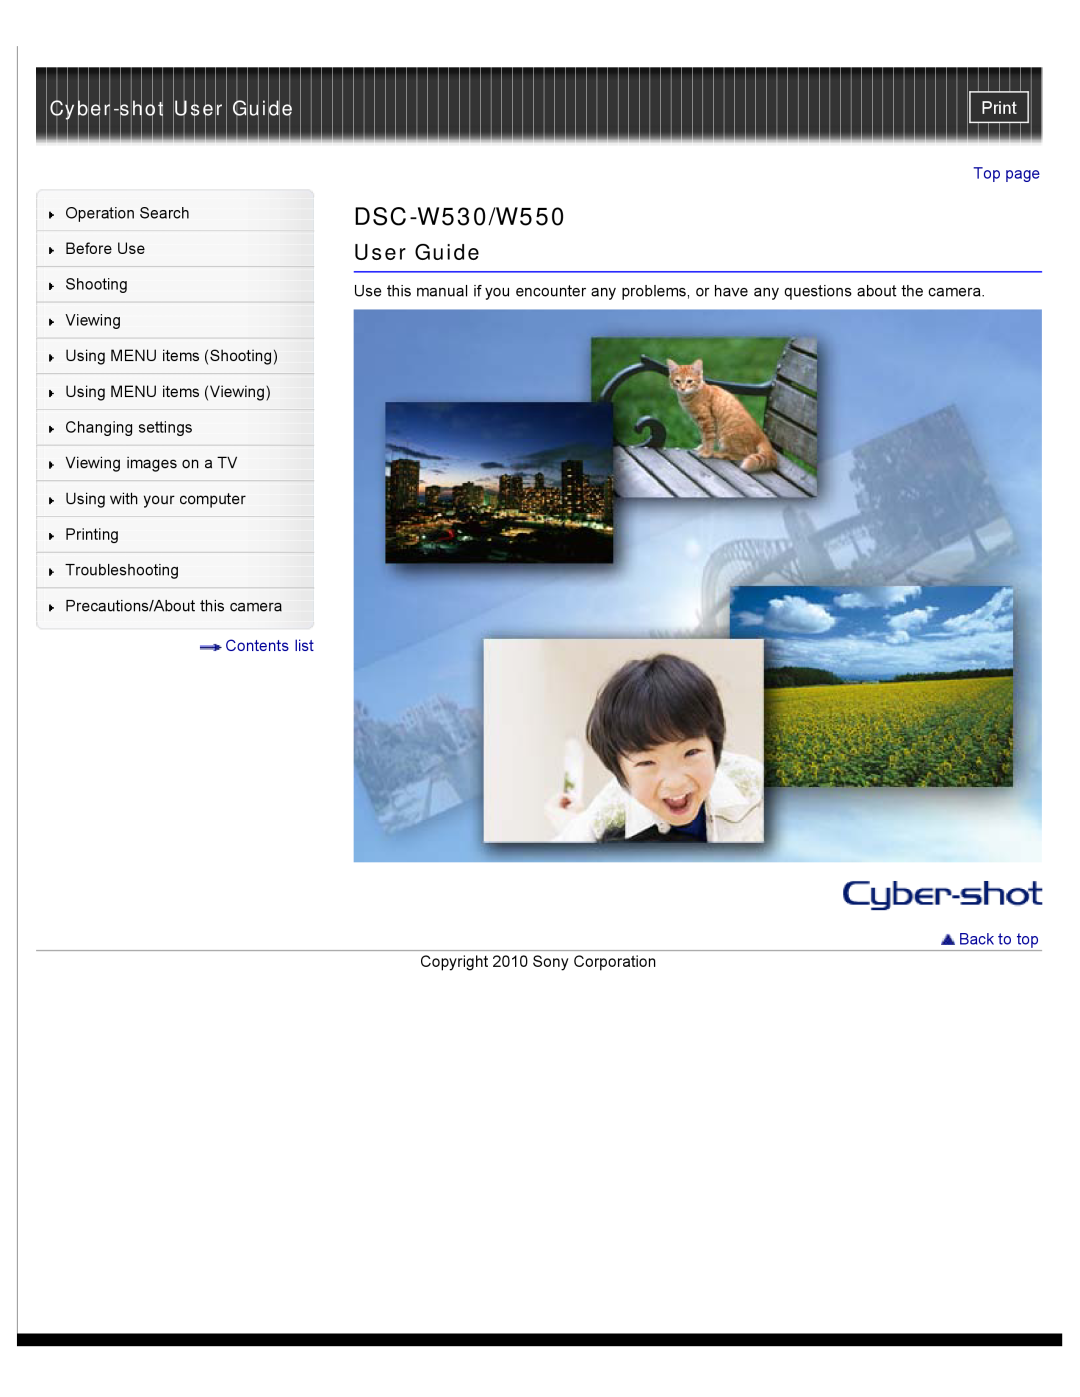 Sony DSCW530 manual Cyber-shot User Guide, Print, DSC-W530/W550, Contents list, Top page, Back to top 